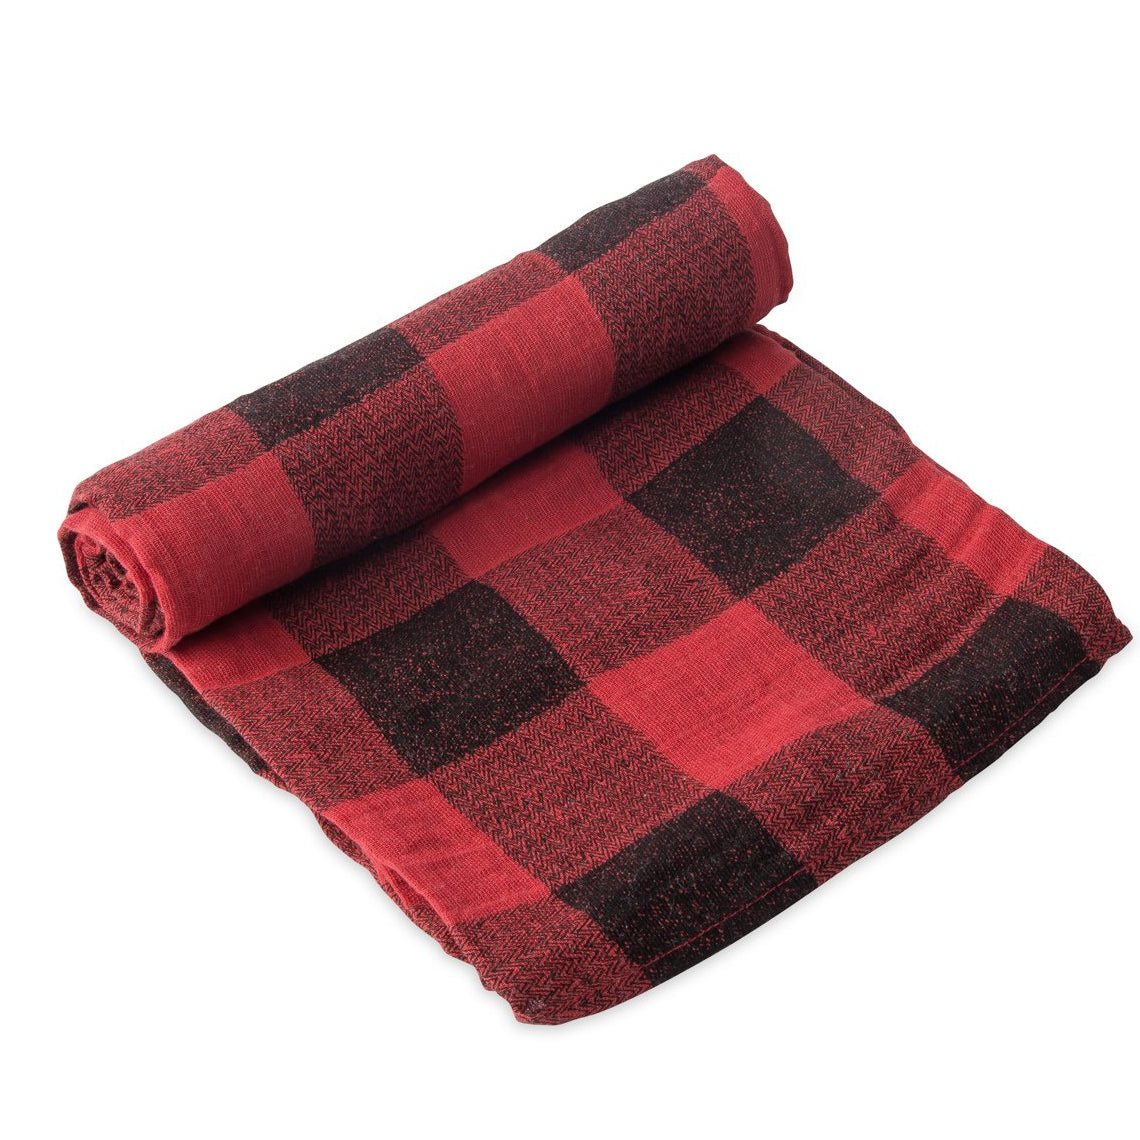 Red Plaid swaddle blanket by Little Unicorn at Bonjour Baby Baskets